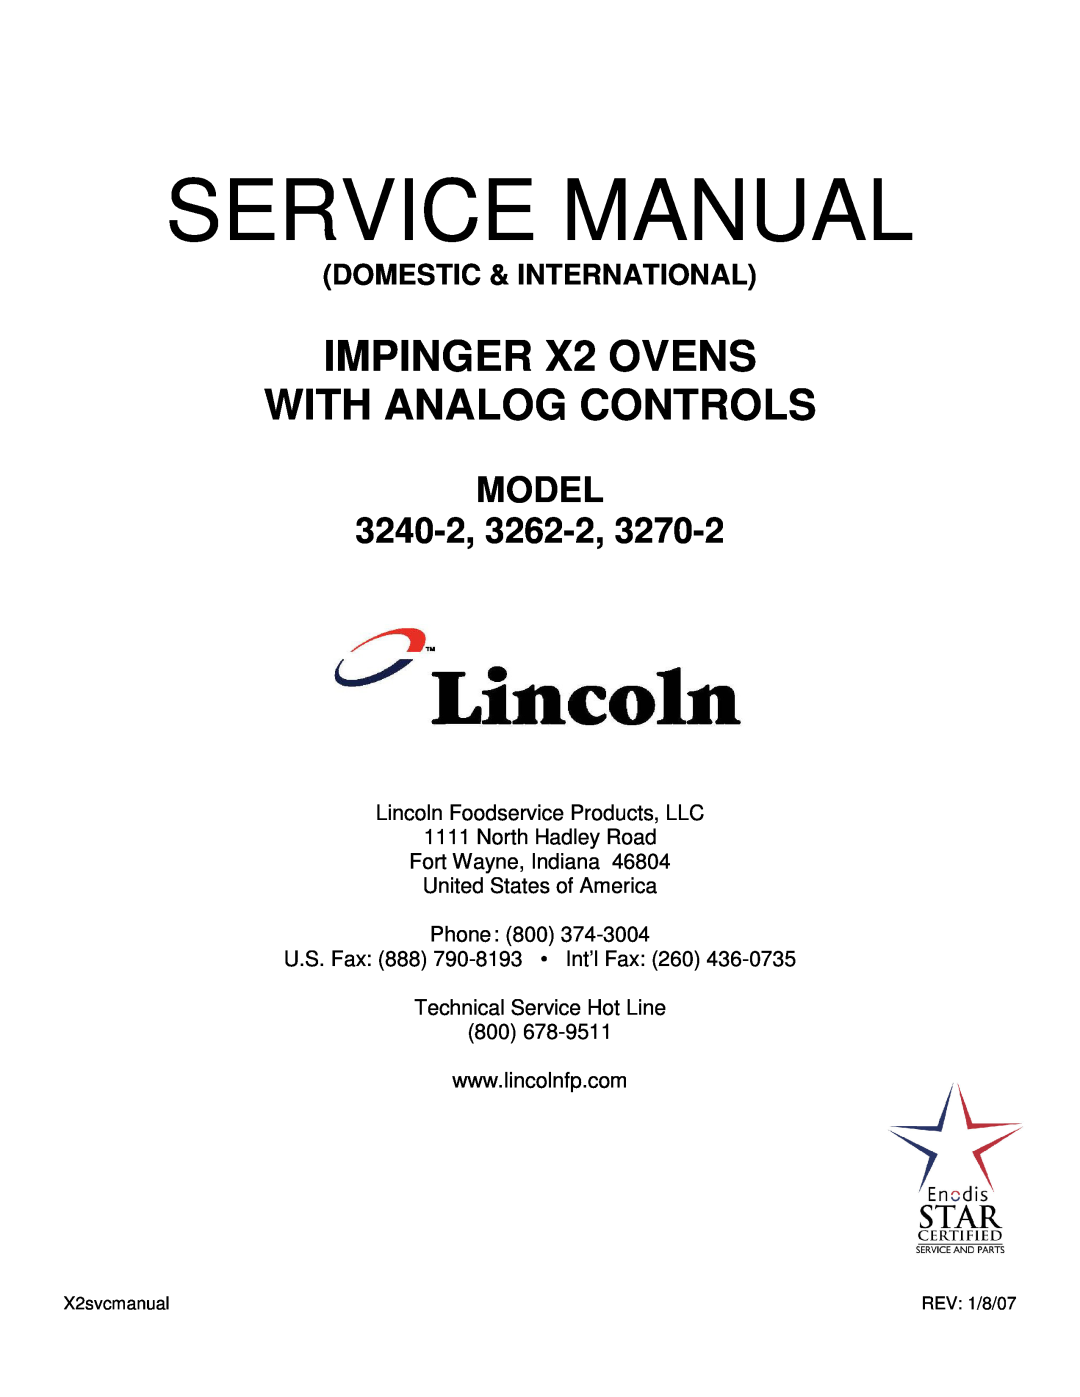 Lincoln 3270-2 manual IMPINGER X2 DIGITAL ADVANTAGE SERIES, Model, Dual Belt Conveyorized Gas Fired Oven, Item No 